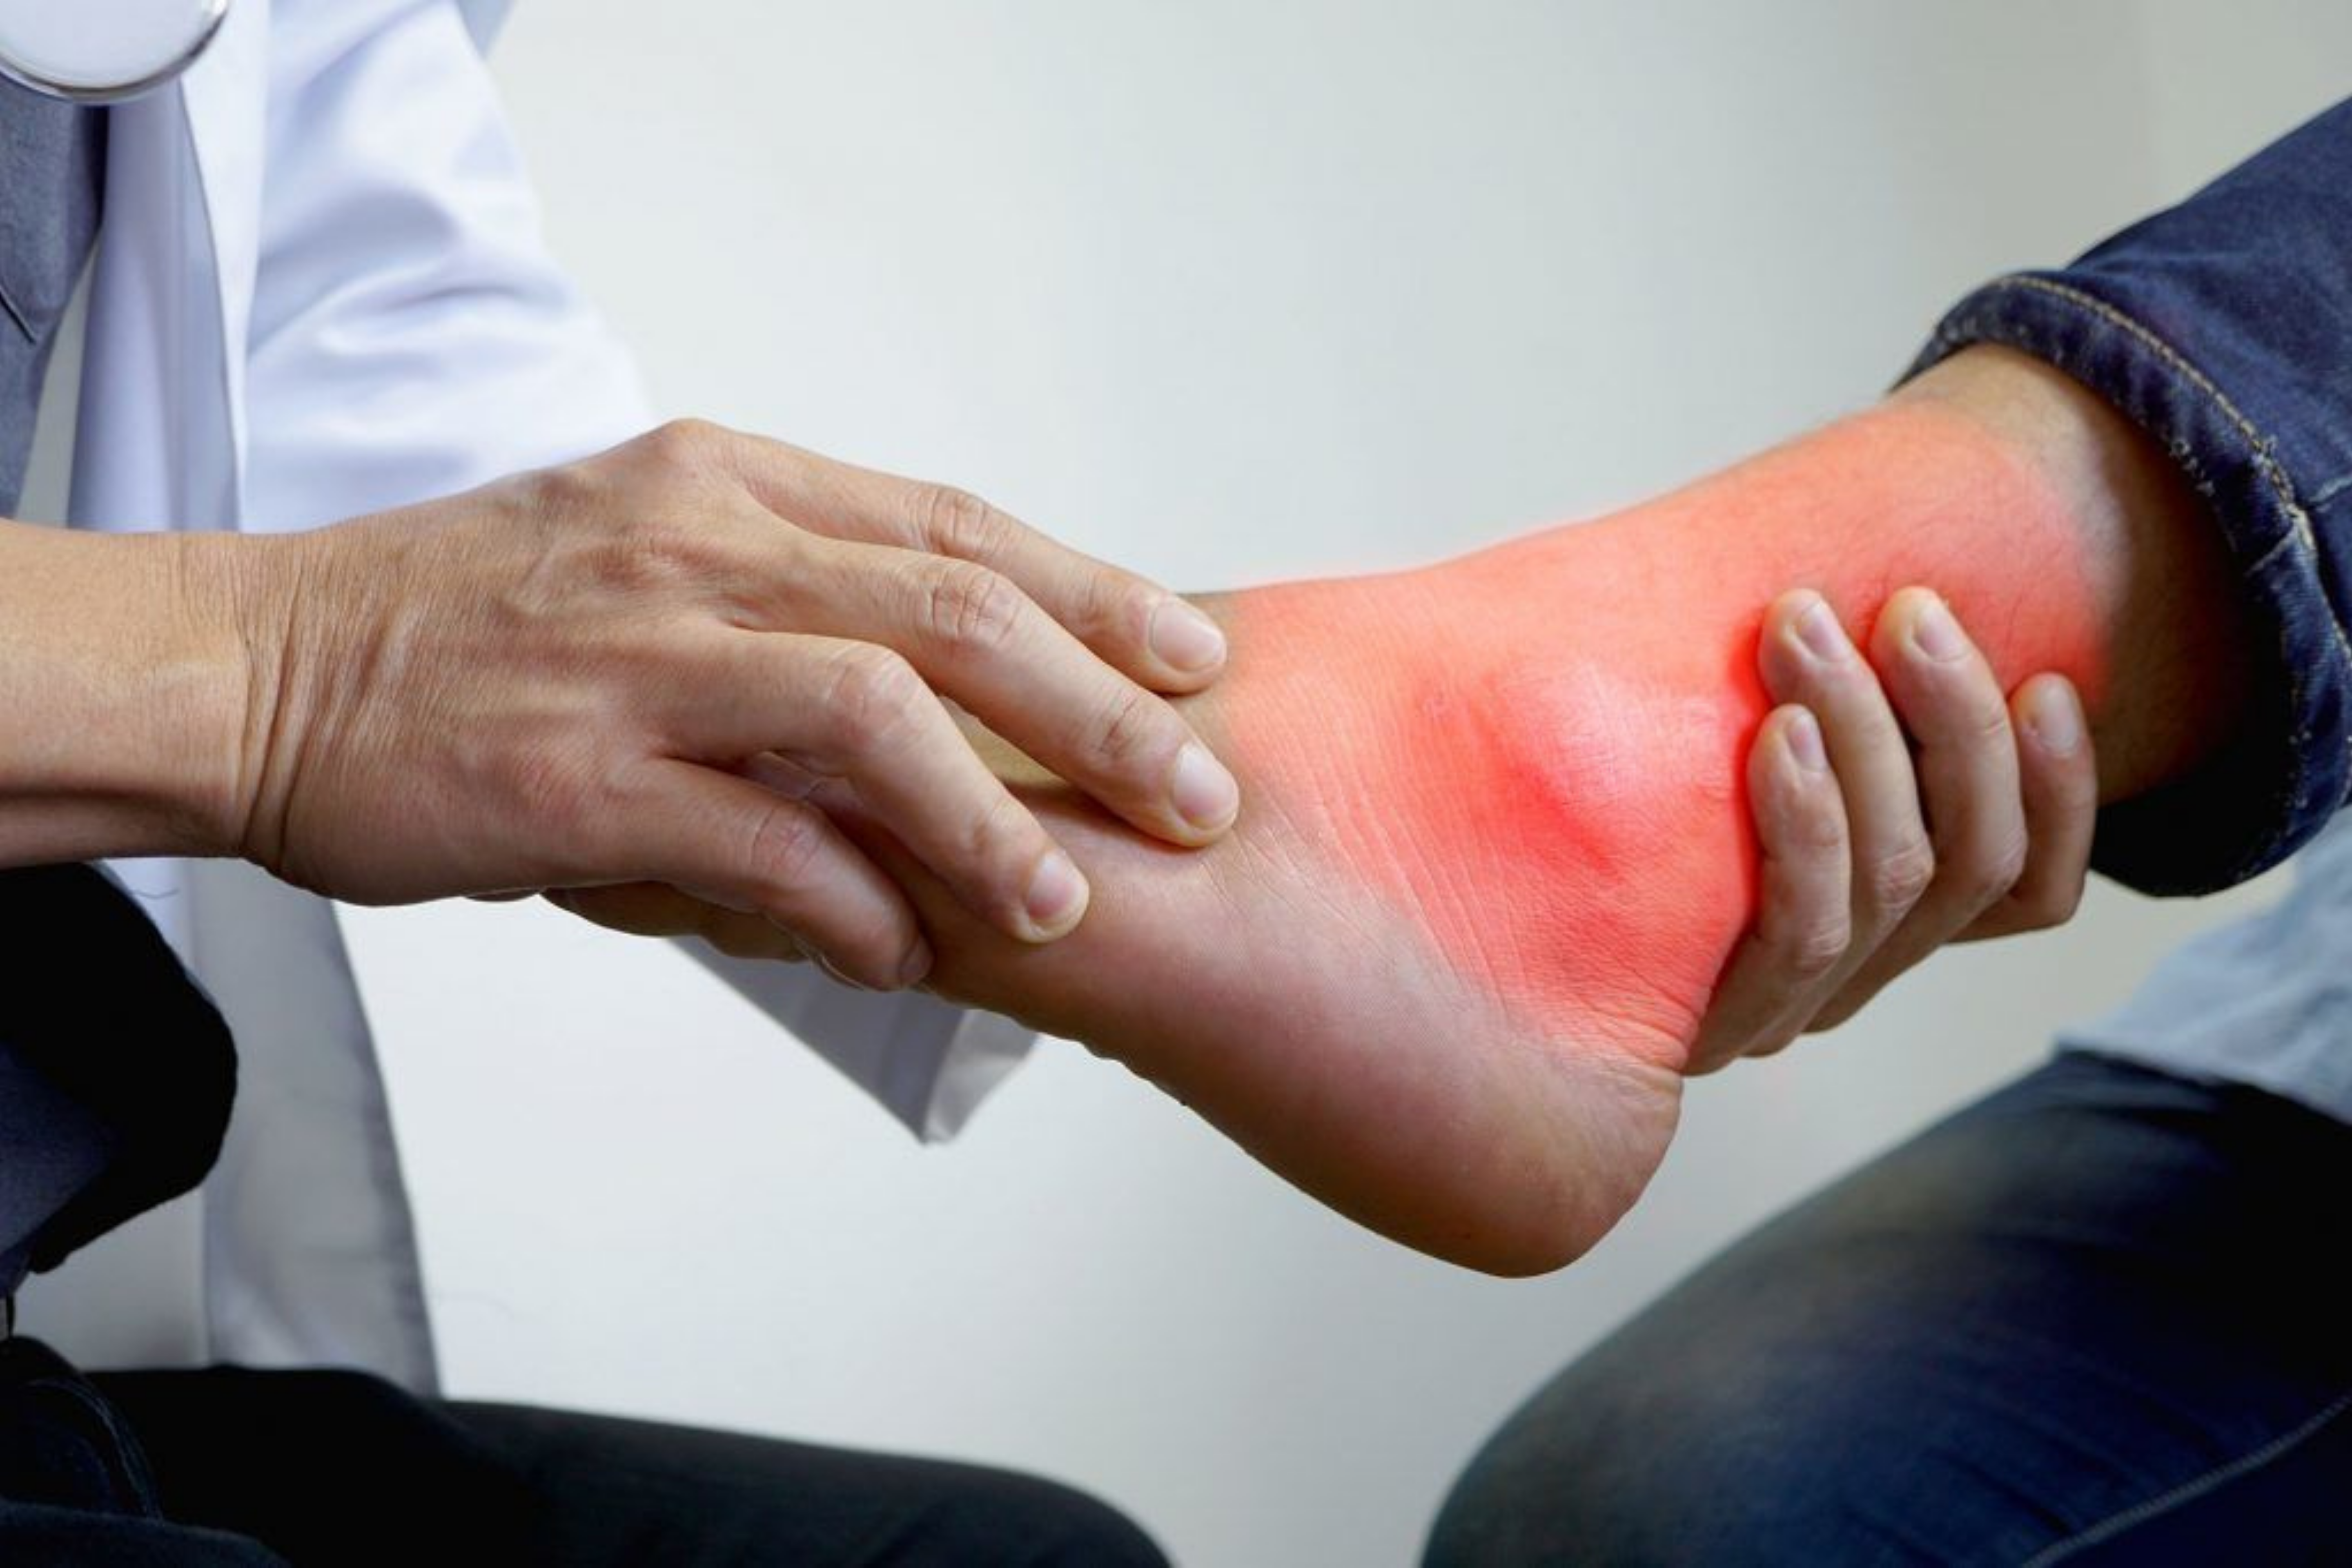 How to Help Your Child Recover Quickly From an Ankle Sprain